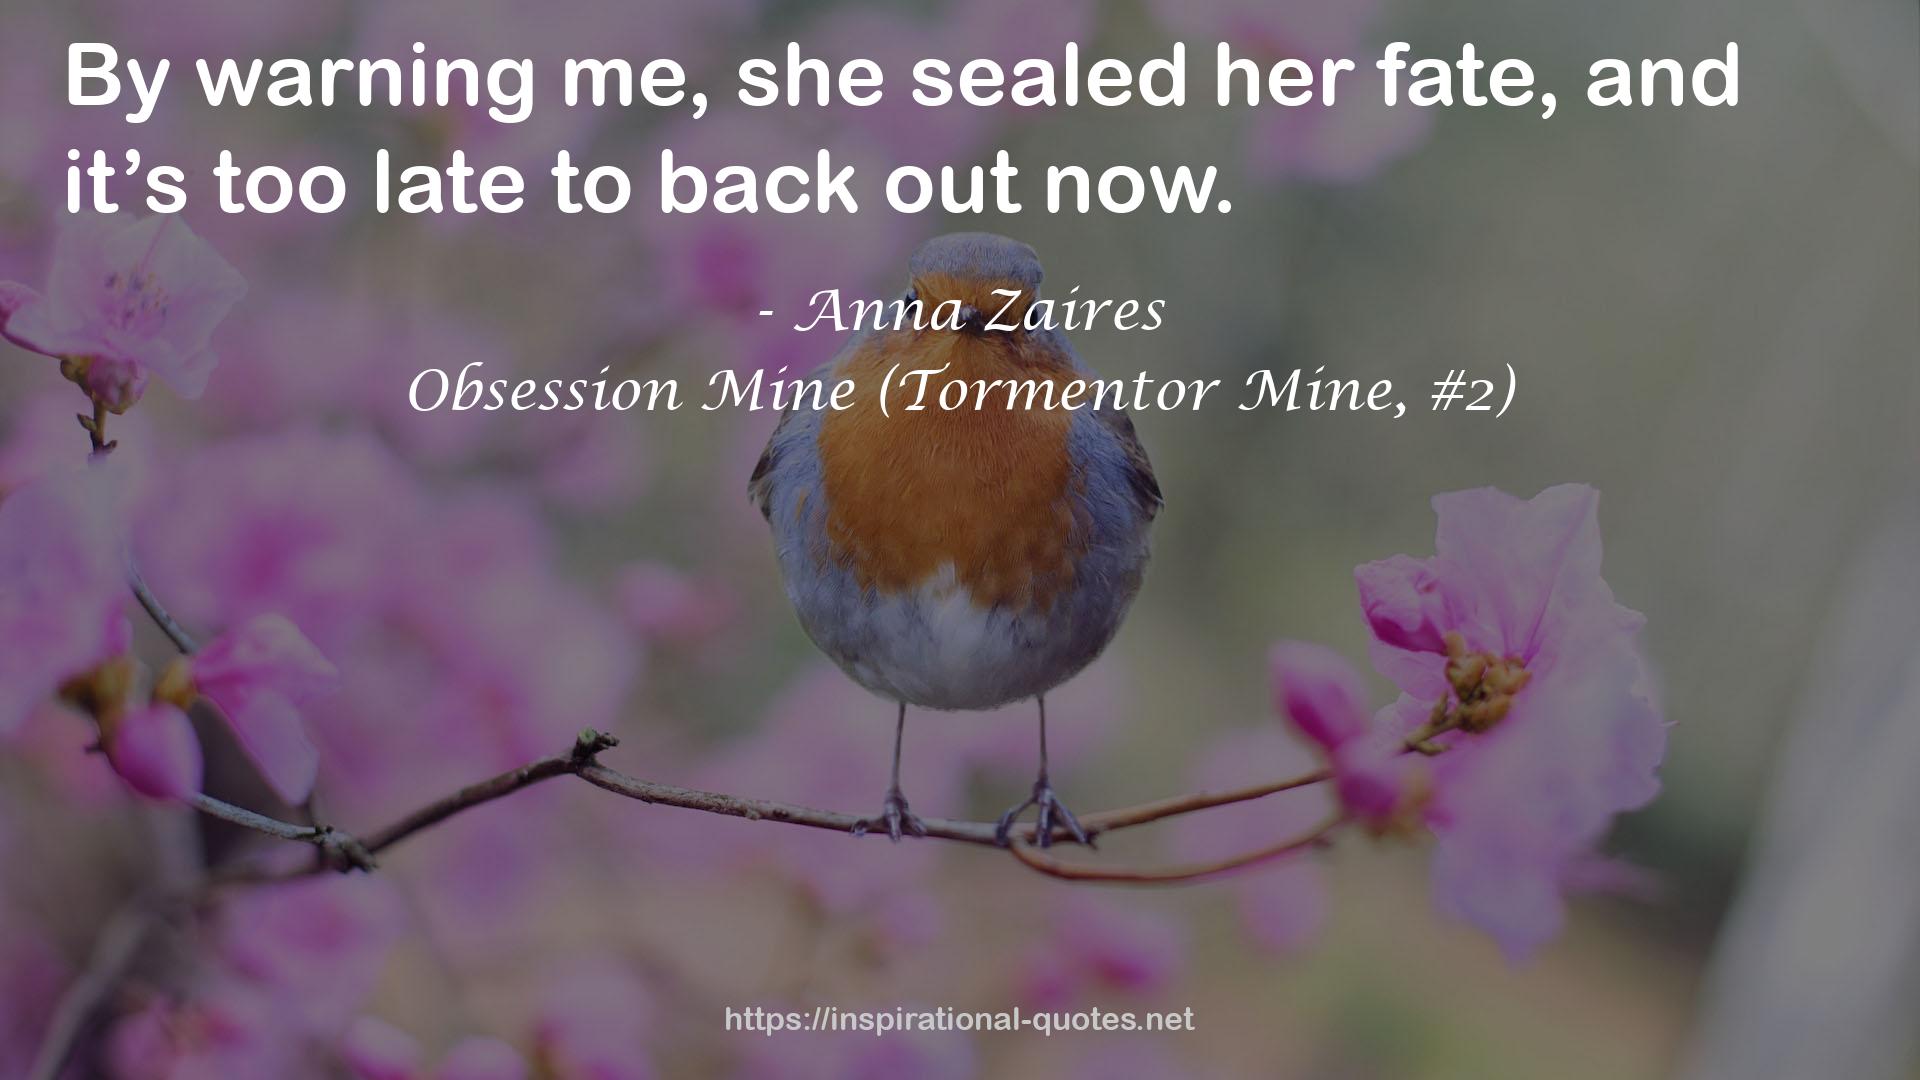 Obsession Mine (Tormentor Mine, #2) QUOTES